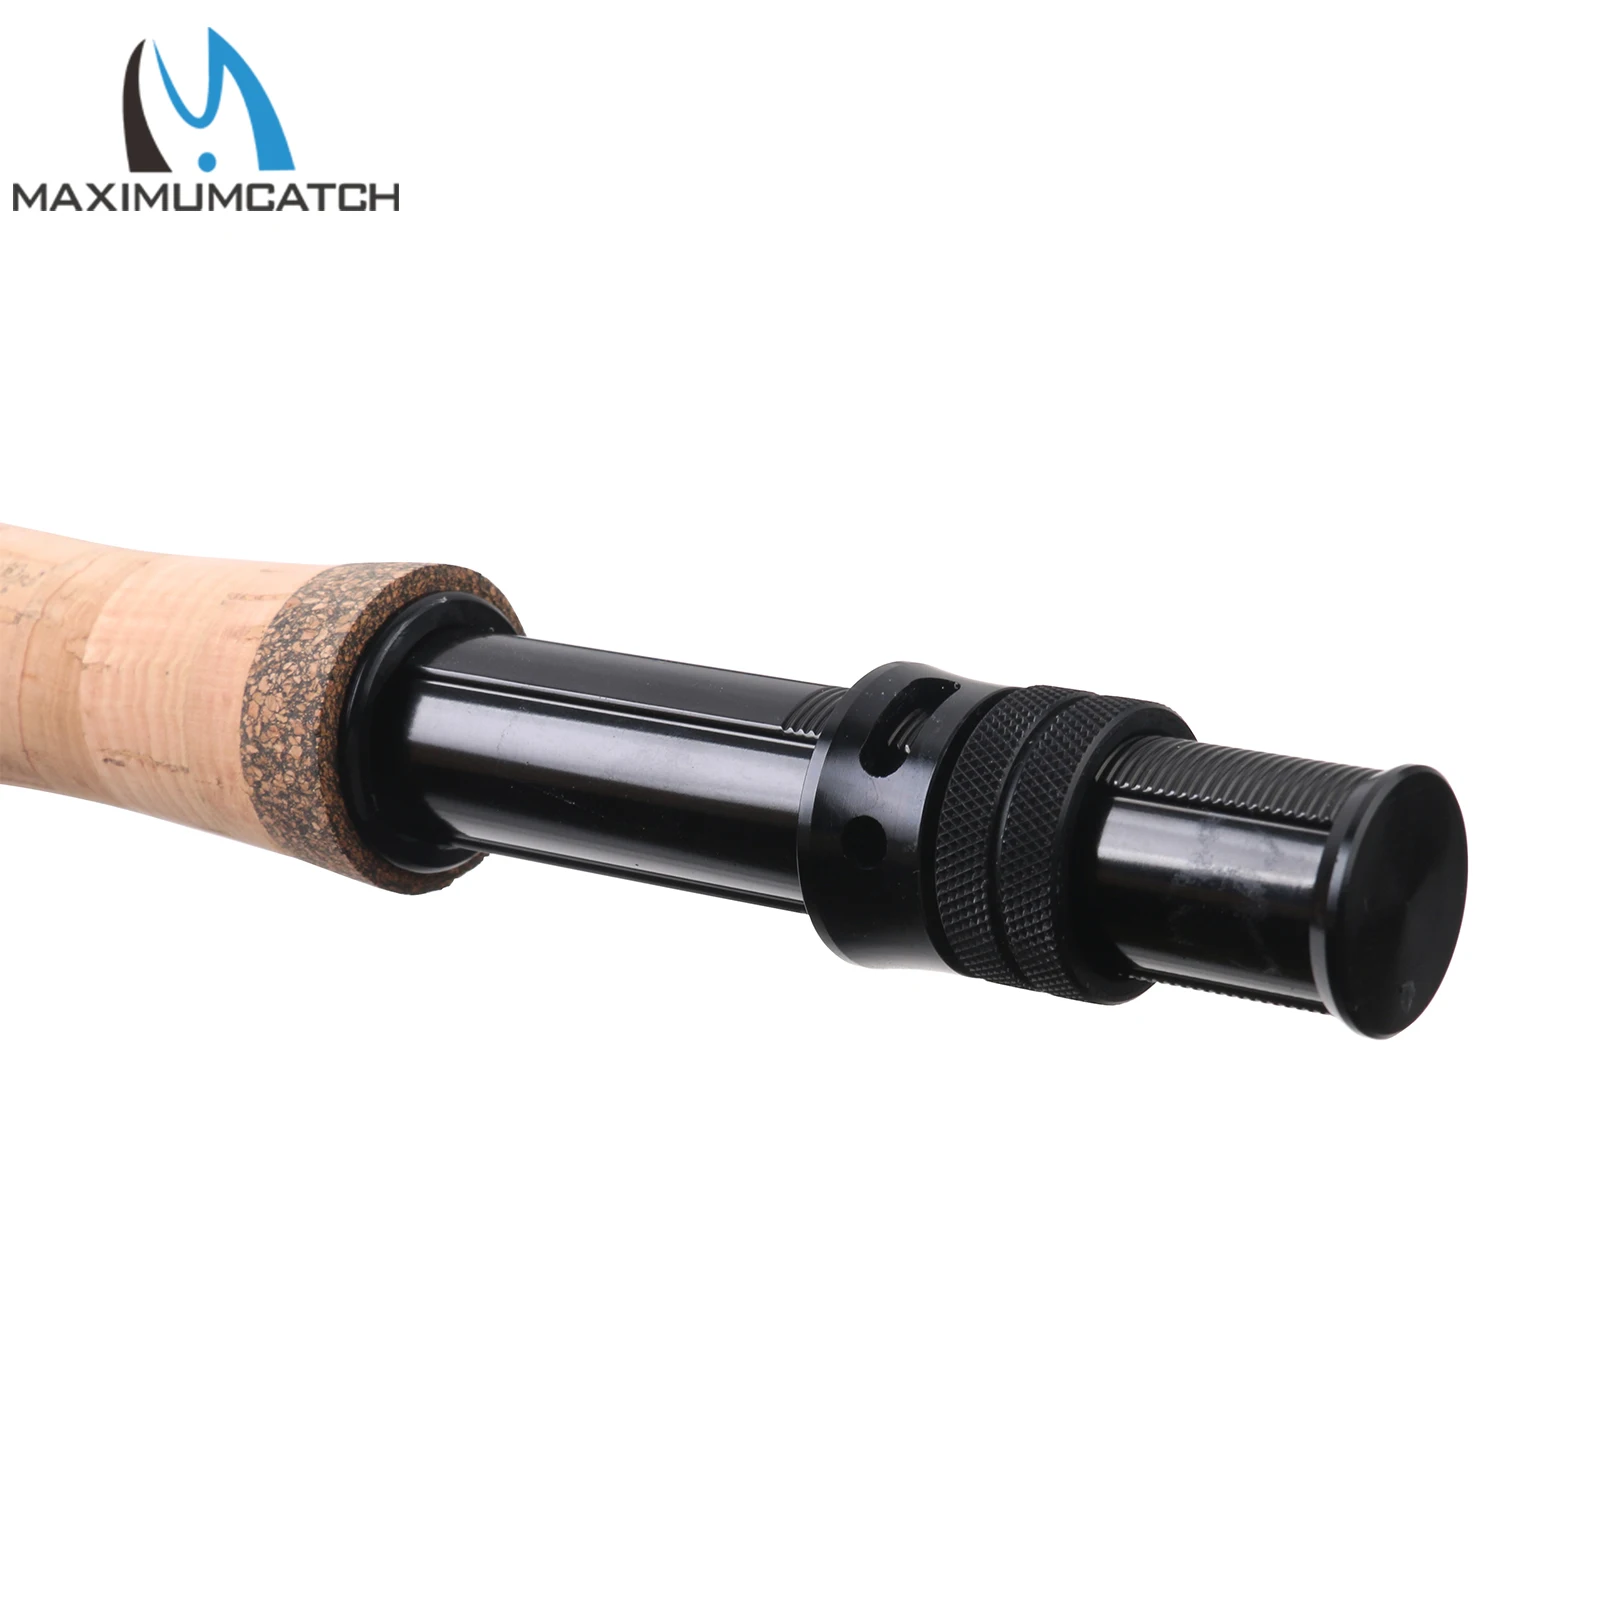 Maximumcatch 10FT-11FT 2/3/4WT 4Sec Nymph Fly Fishing Rod IM10 Graphite  Carbon Fiber Fast Action Fly Rod with Nymph Line